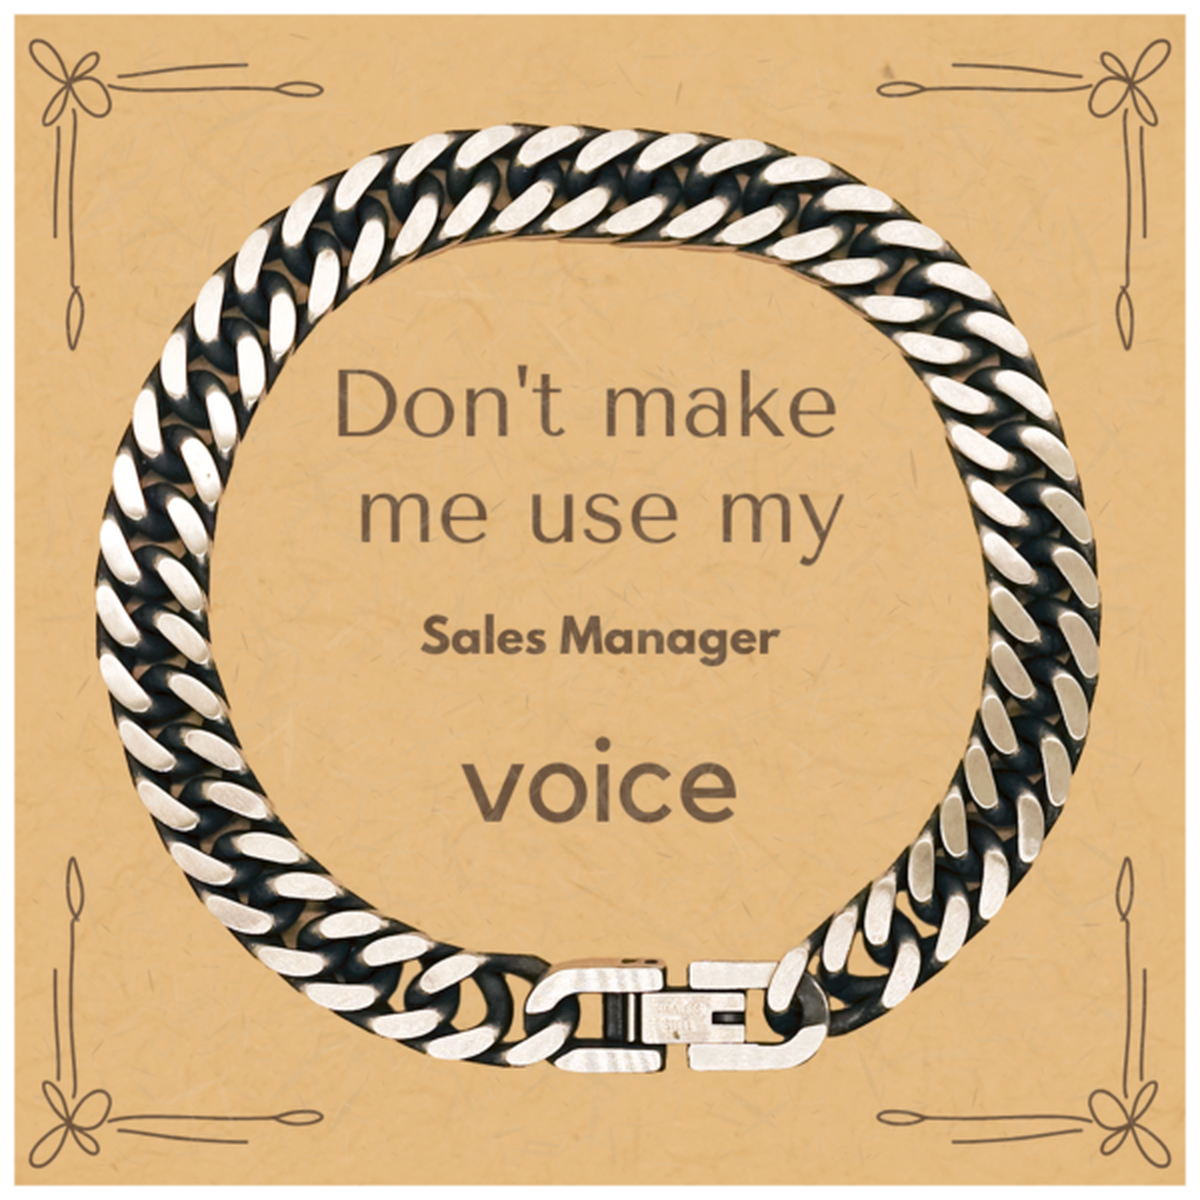 Don't make me use my Sales Manager voice, Sarcasm Sales Manager Card Gifts, Christmas Sales Manager Cuban Link Chain Bracelet Birthday Unique Gifts For Sales Manager Coworkers, Men, Women, Colleague, Friends